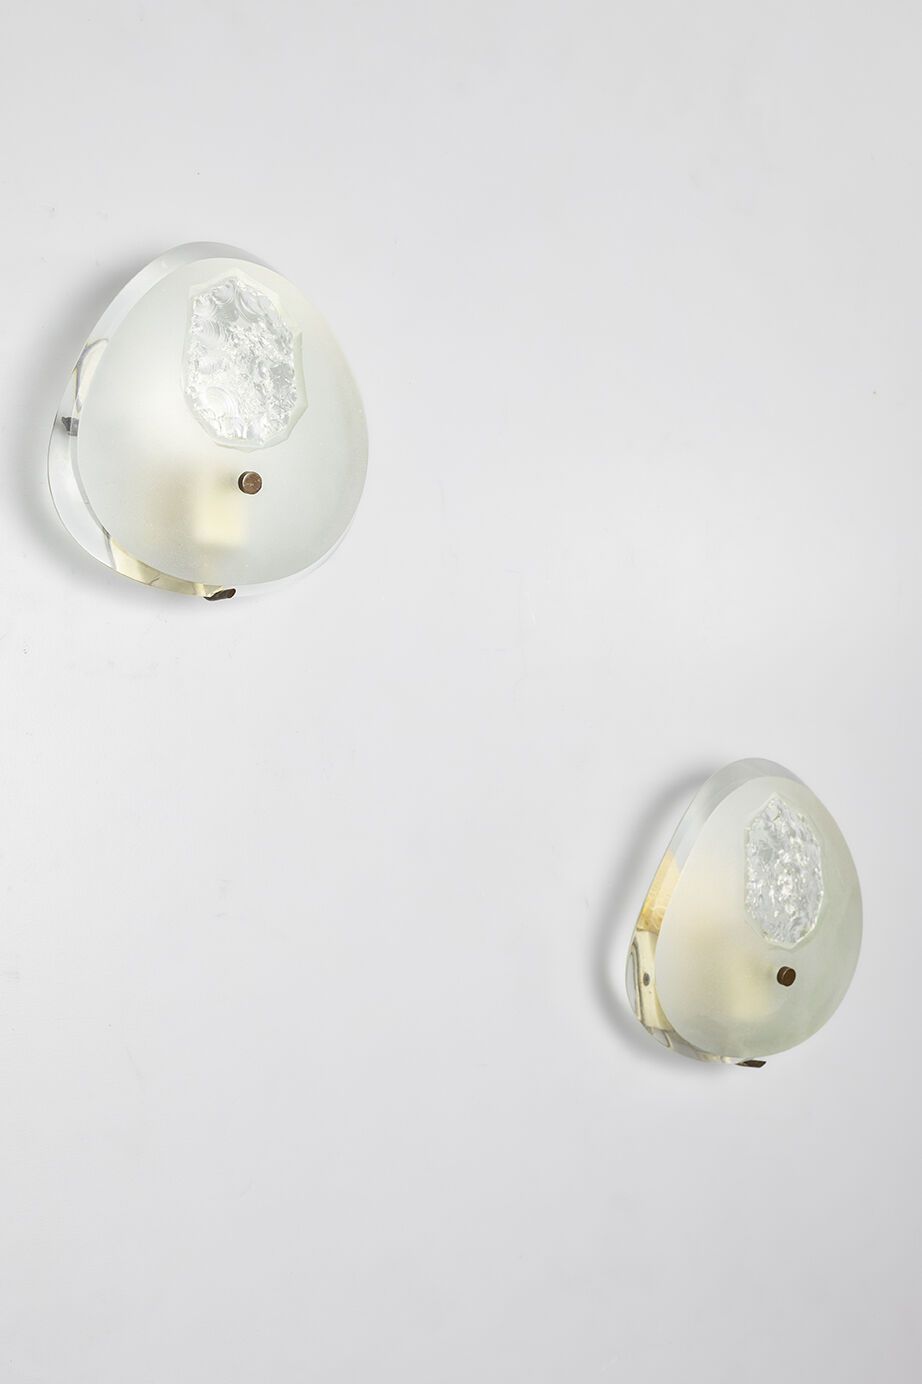 Max INGRAND (1908-1969) MAX INGRAND (1908-1969)

A pair of sconces forming oval &hellip;